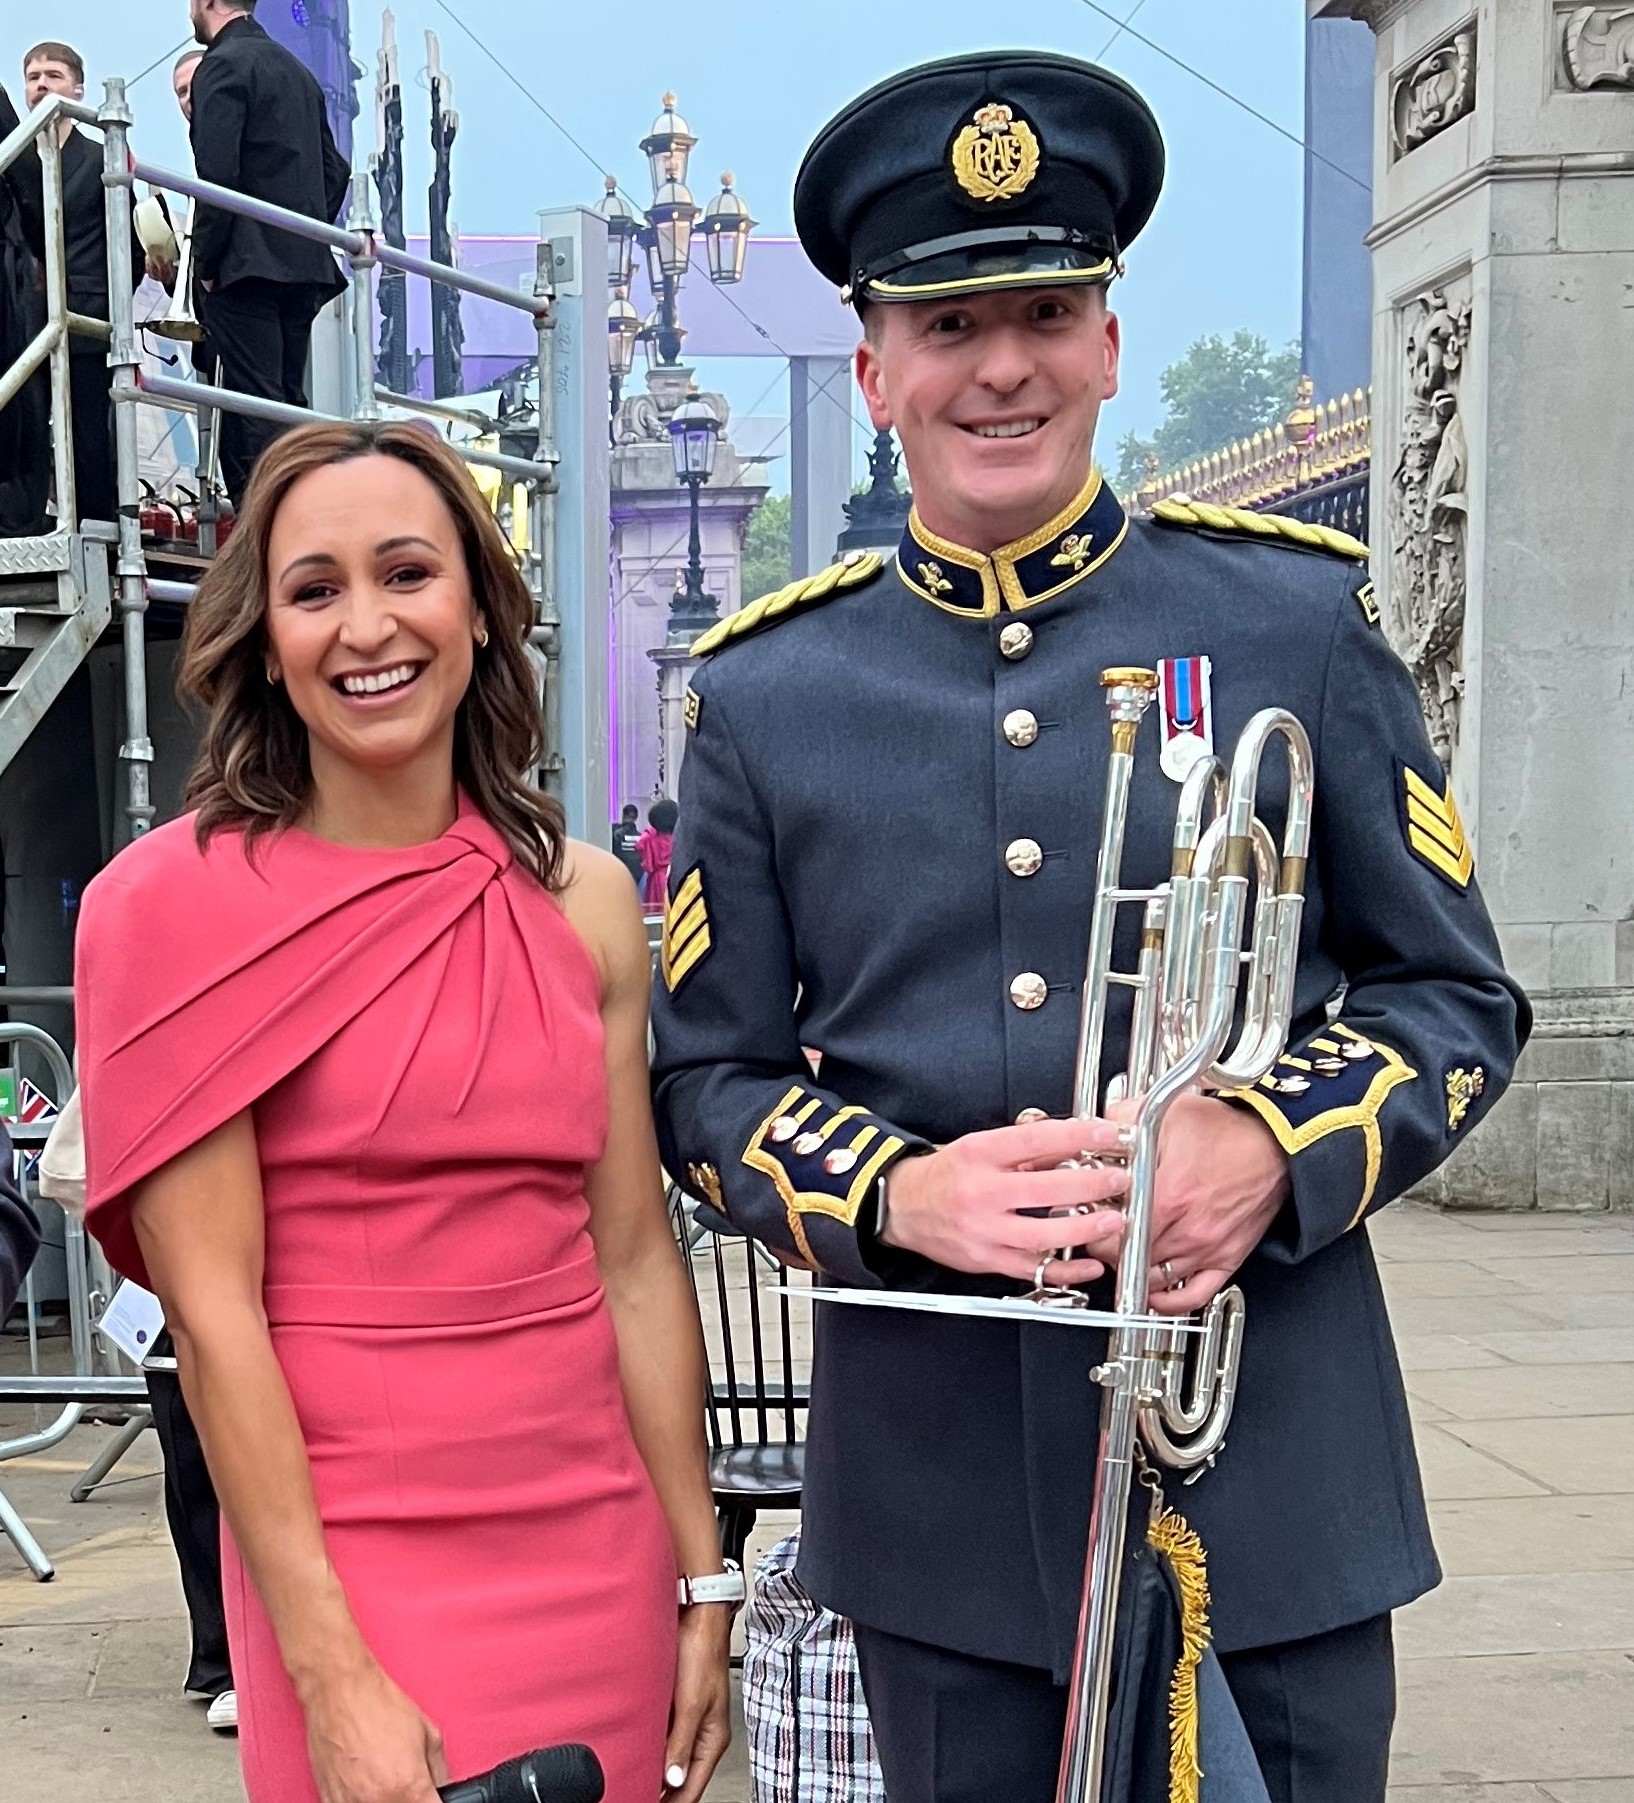 Trumpeteer stand with Jessica Ennis-Hill.